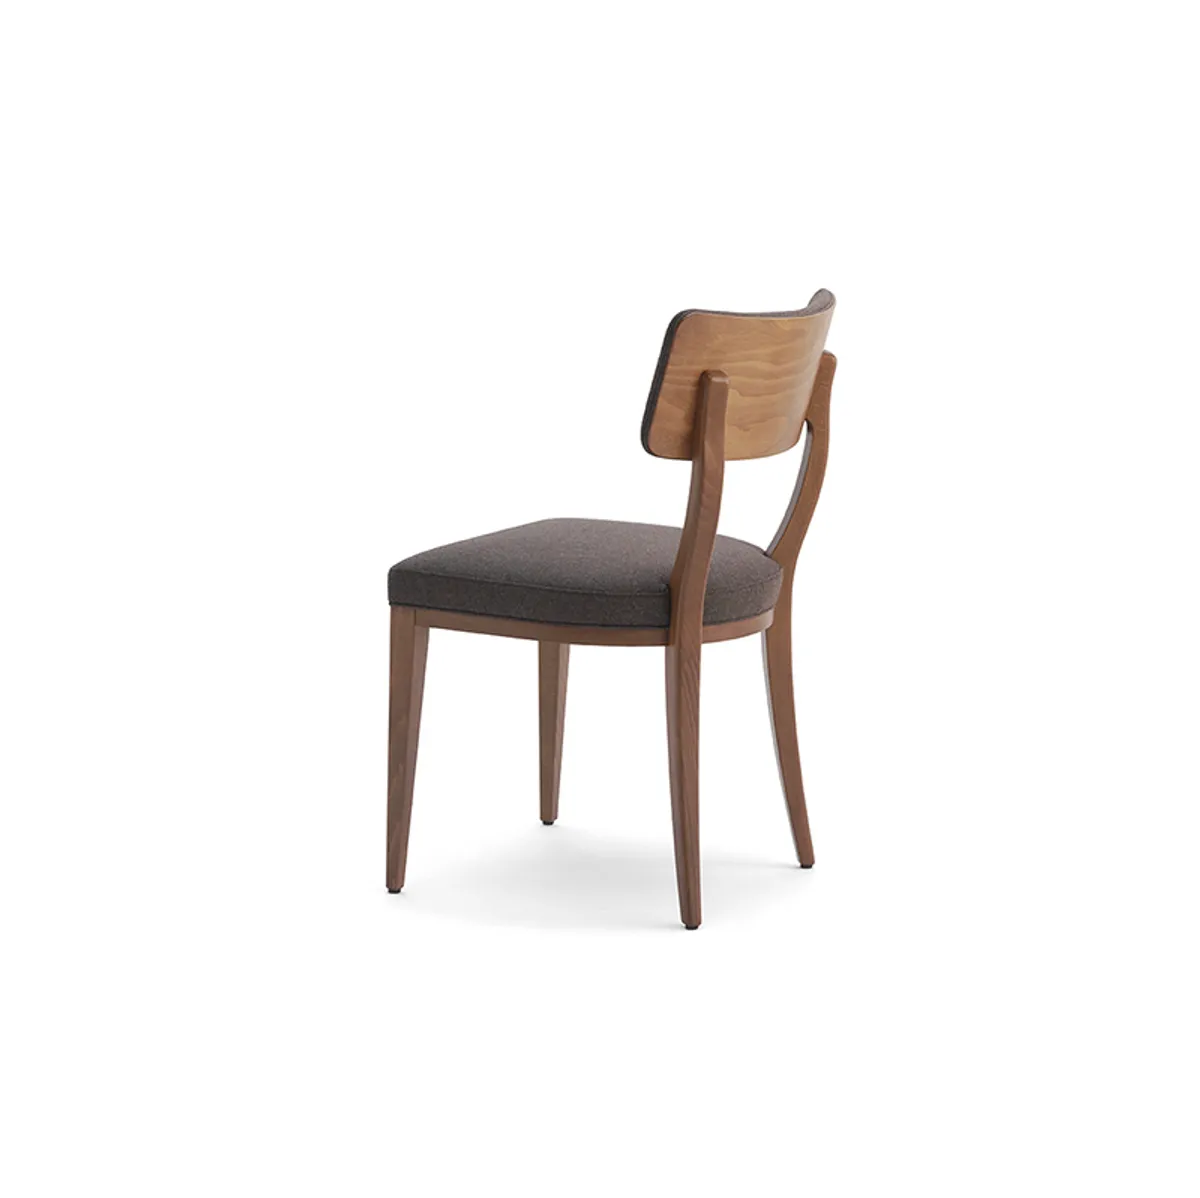 Chopin-side-chair-wooden-and-upholstered-furniture-insideoutcontracts-2